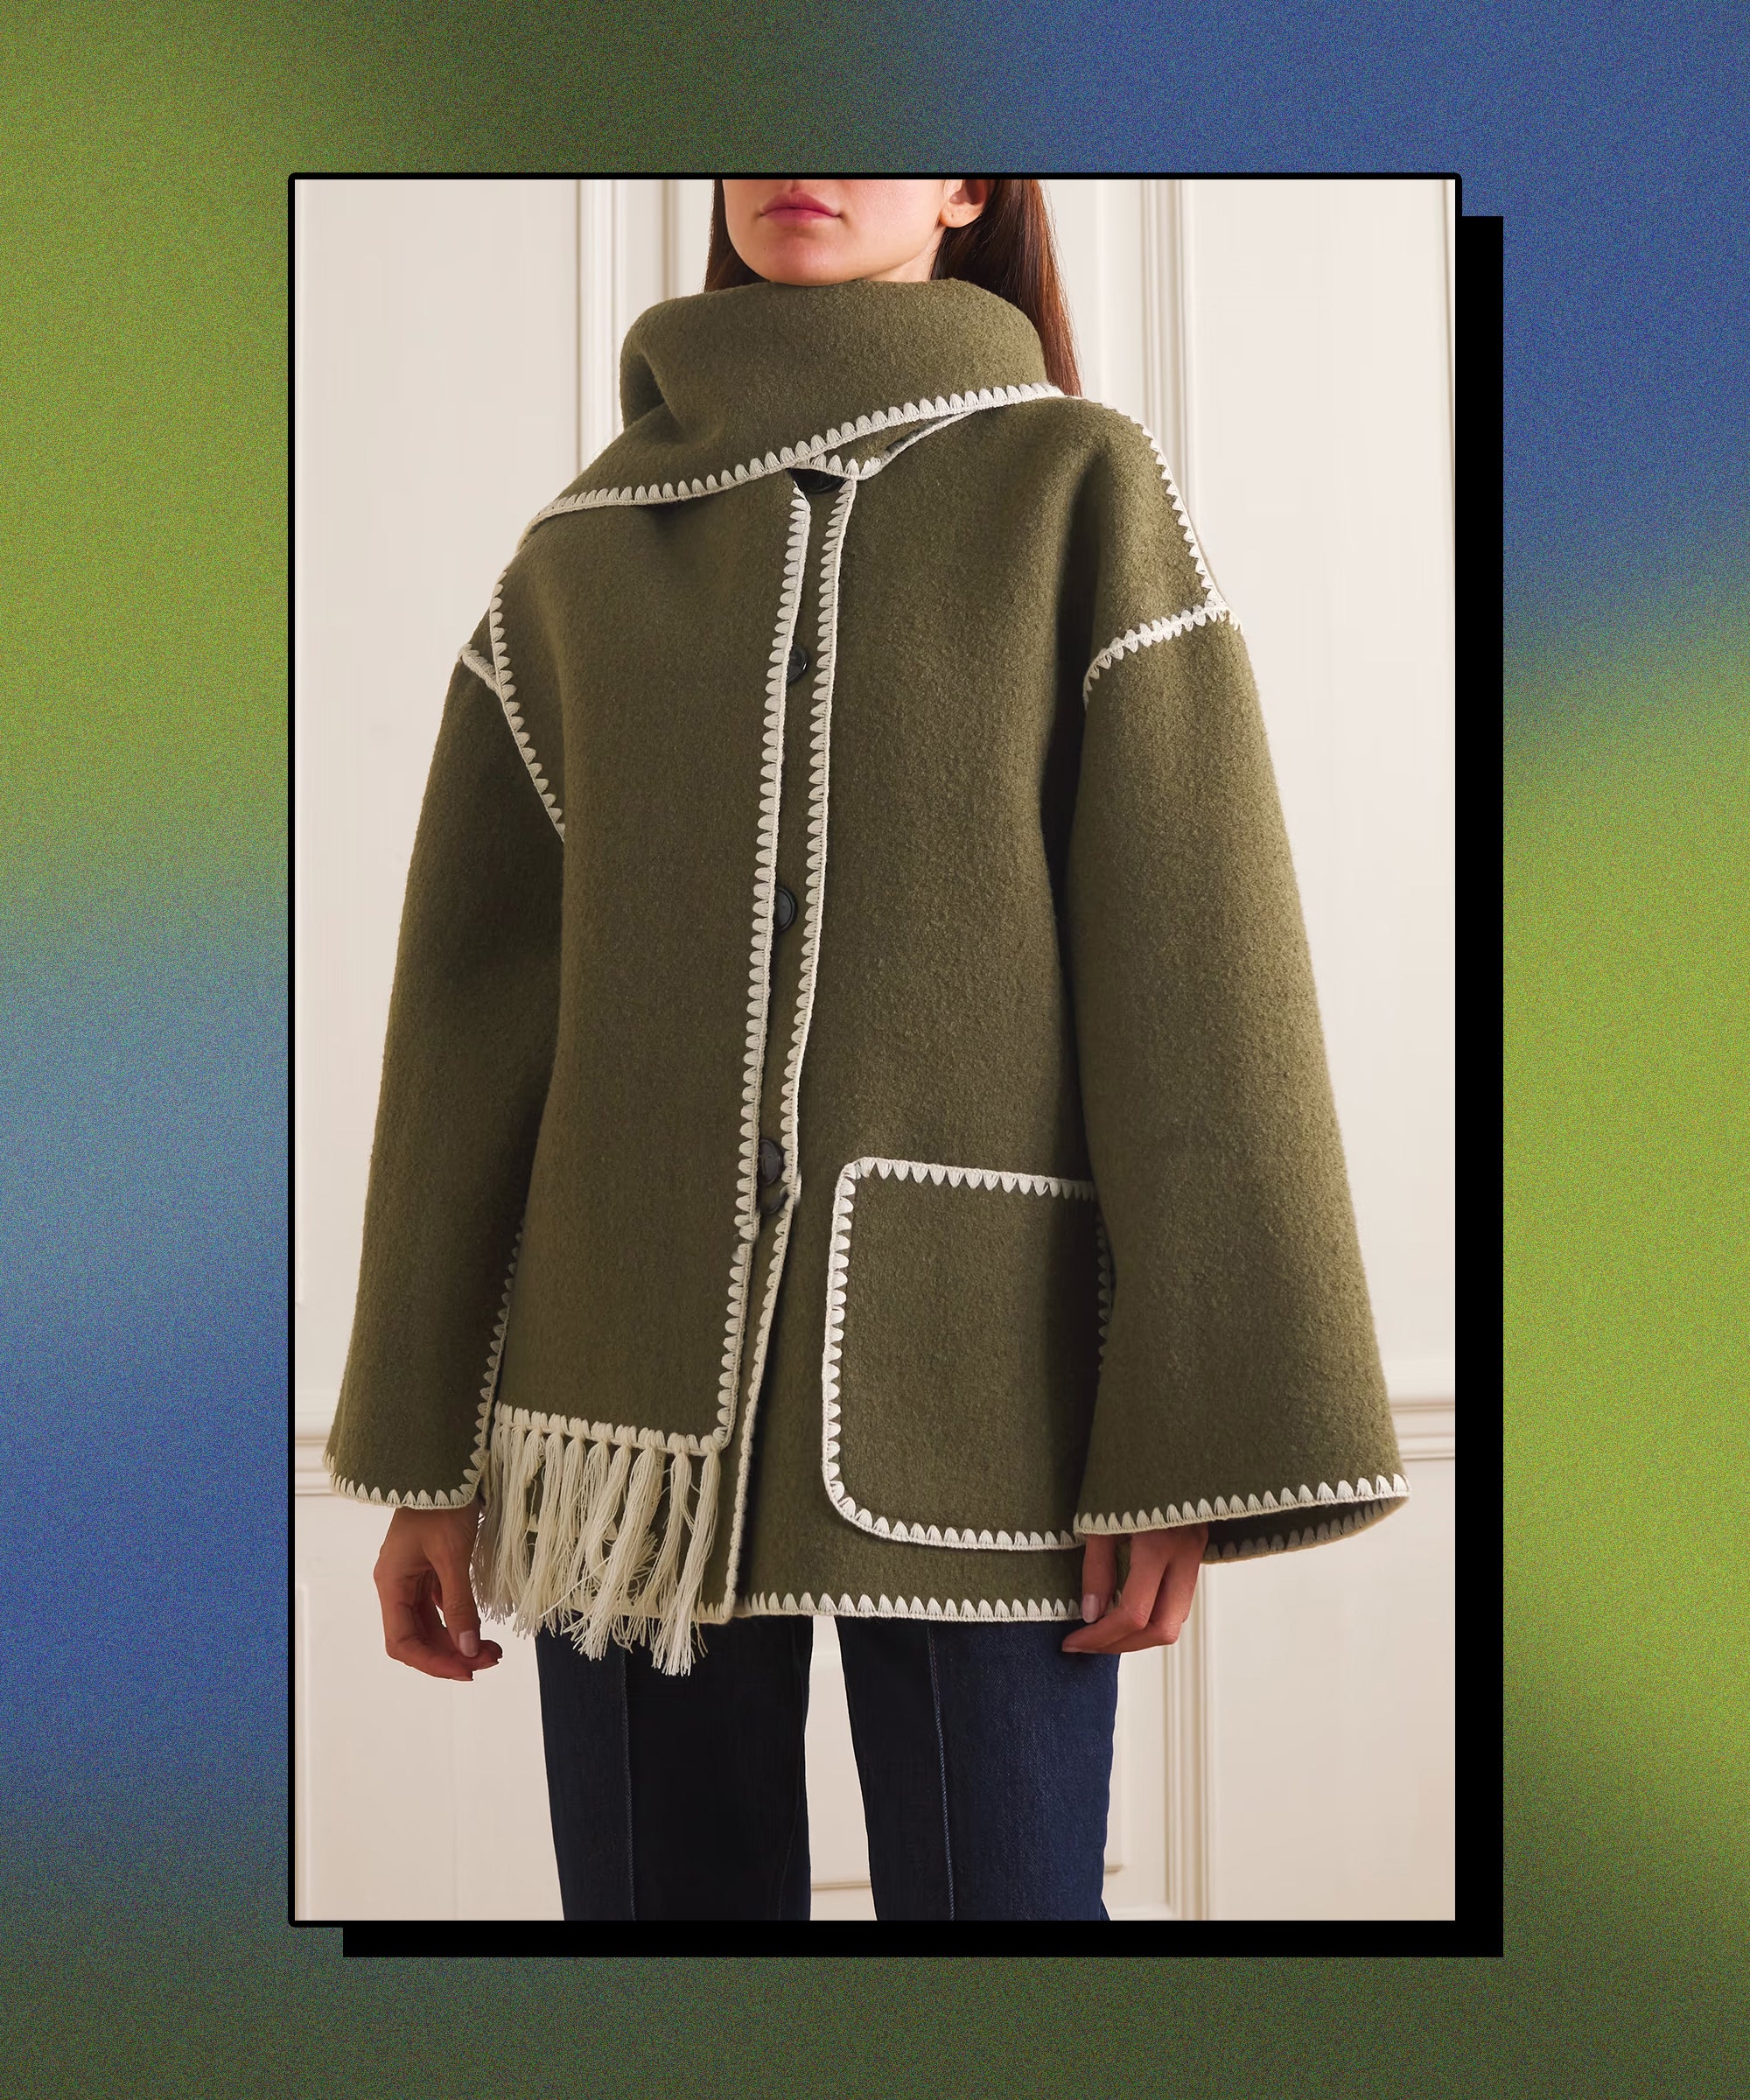 Scarf Jackets Are Winter's Most Viral Coat Trend